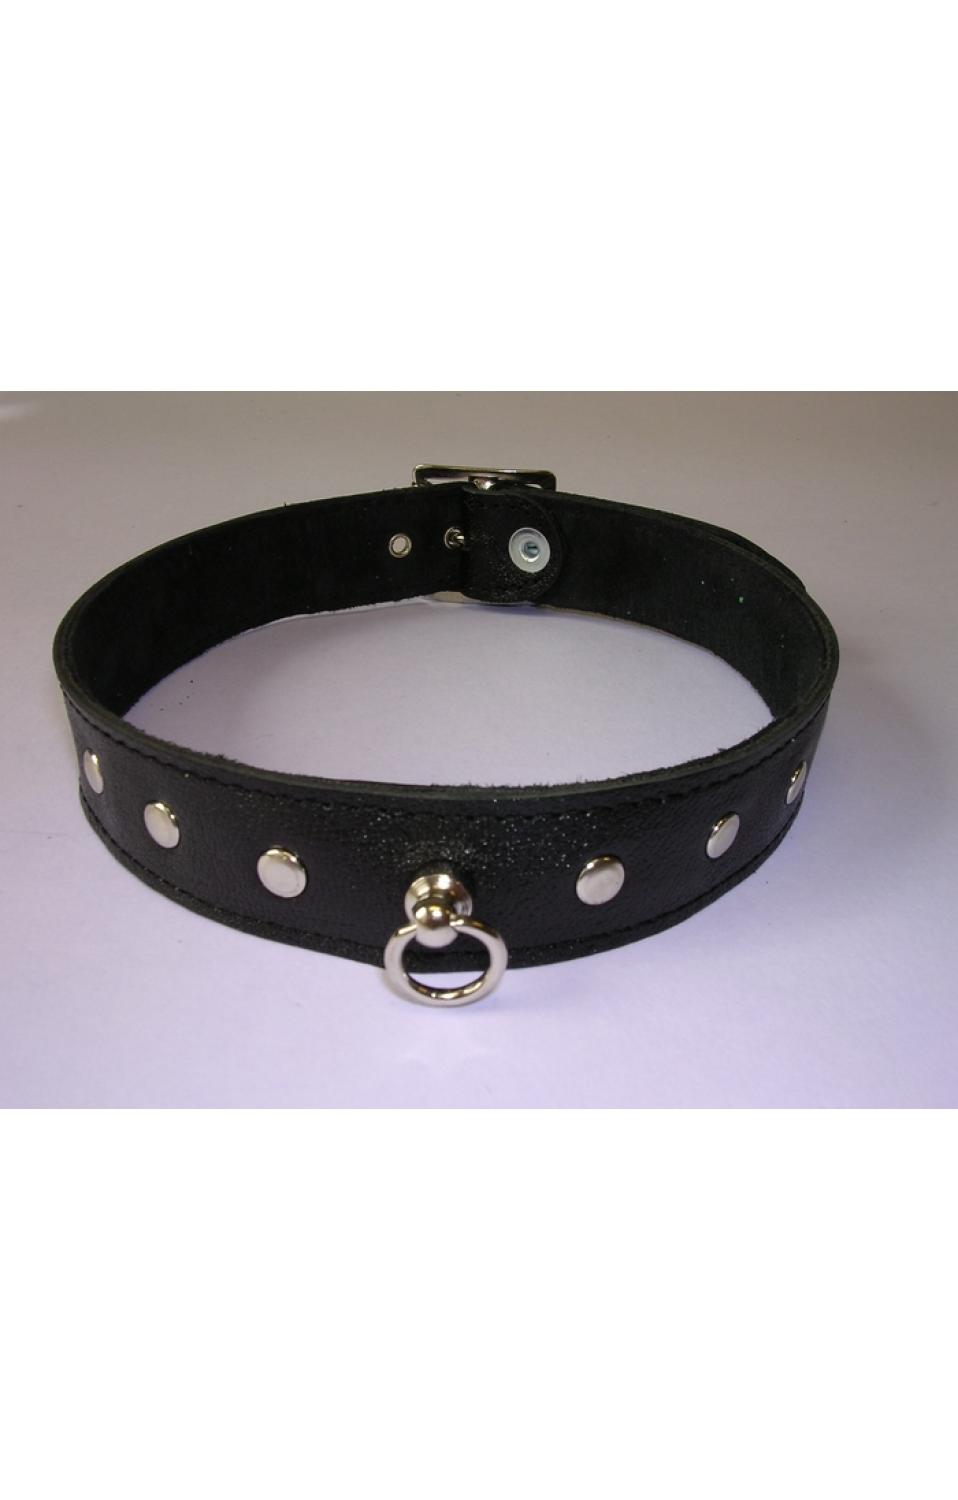 Leather 1 Inch (2 1/2 cm) Collar With Rivets - 7533